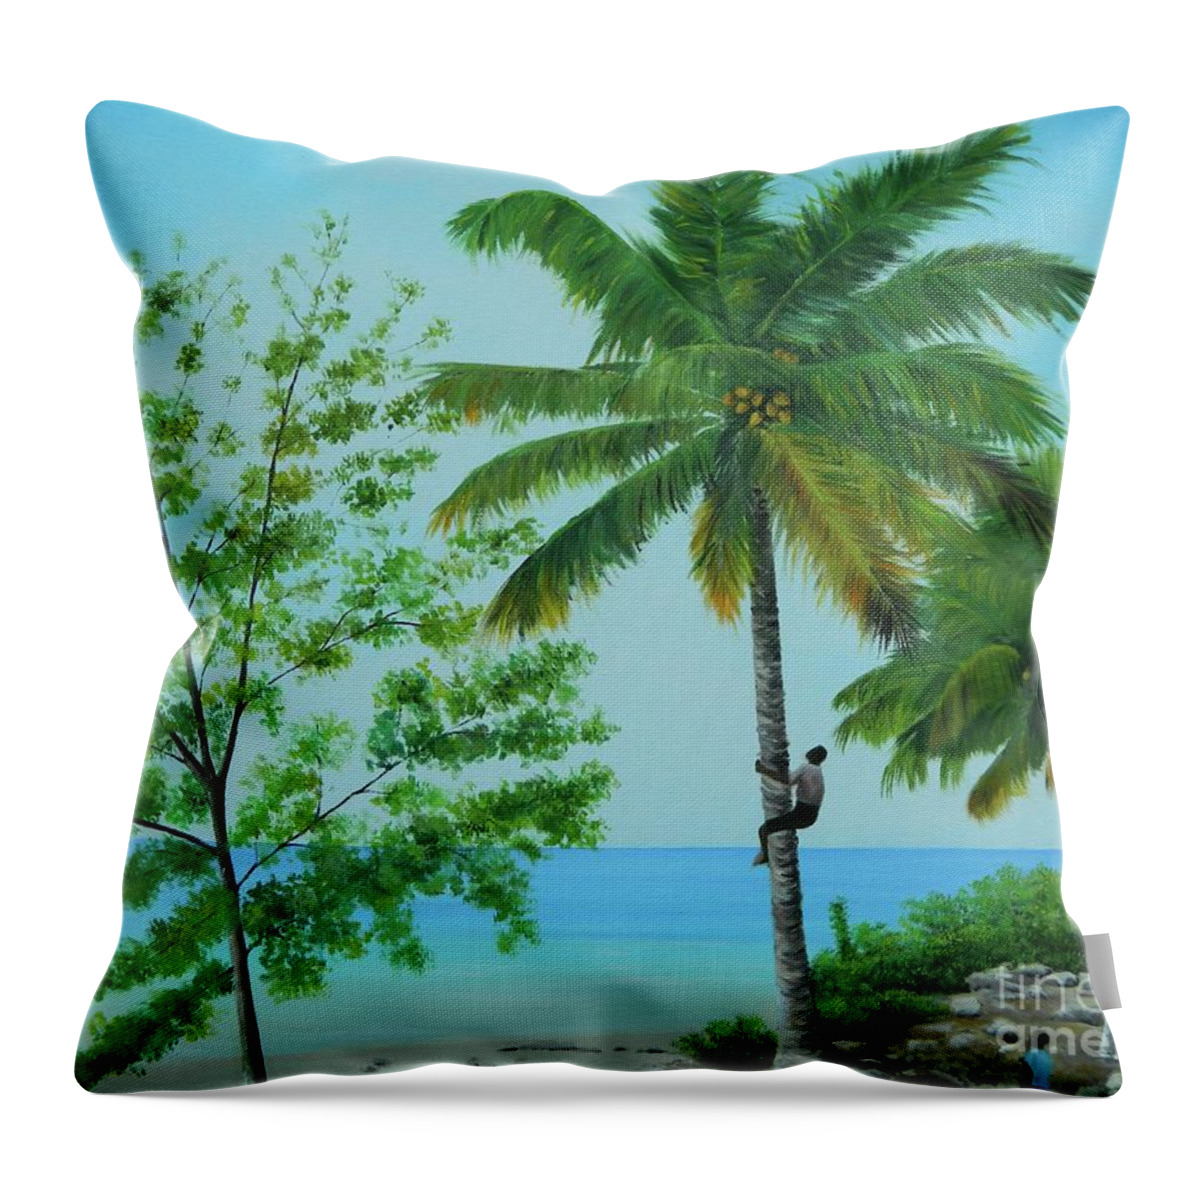 Tropical Landscape Throw Pillow featuring the painting Boy Climbing Coconut Tree by Kenneth Harris